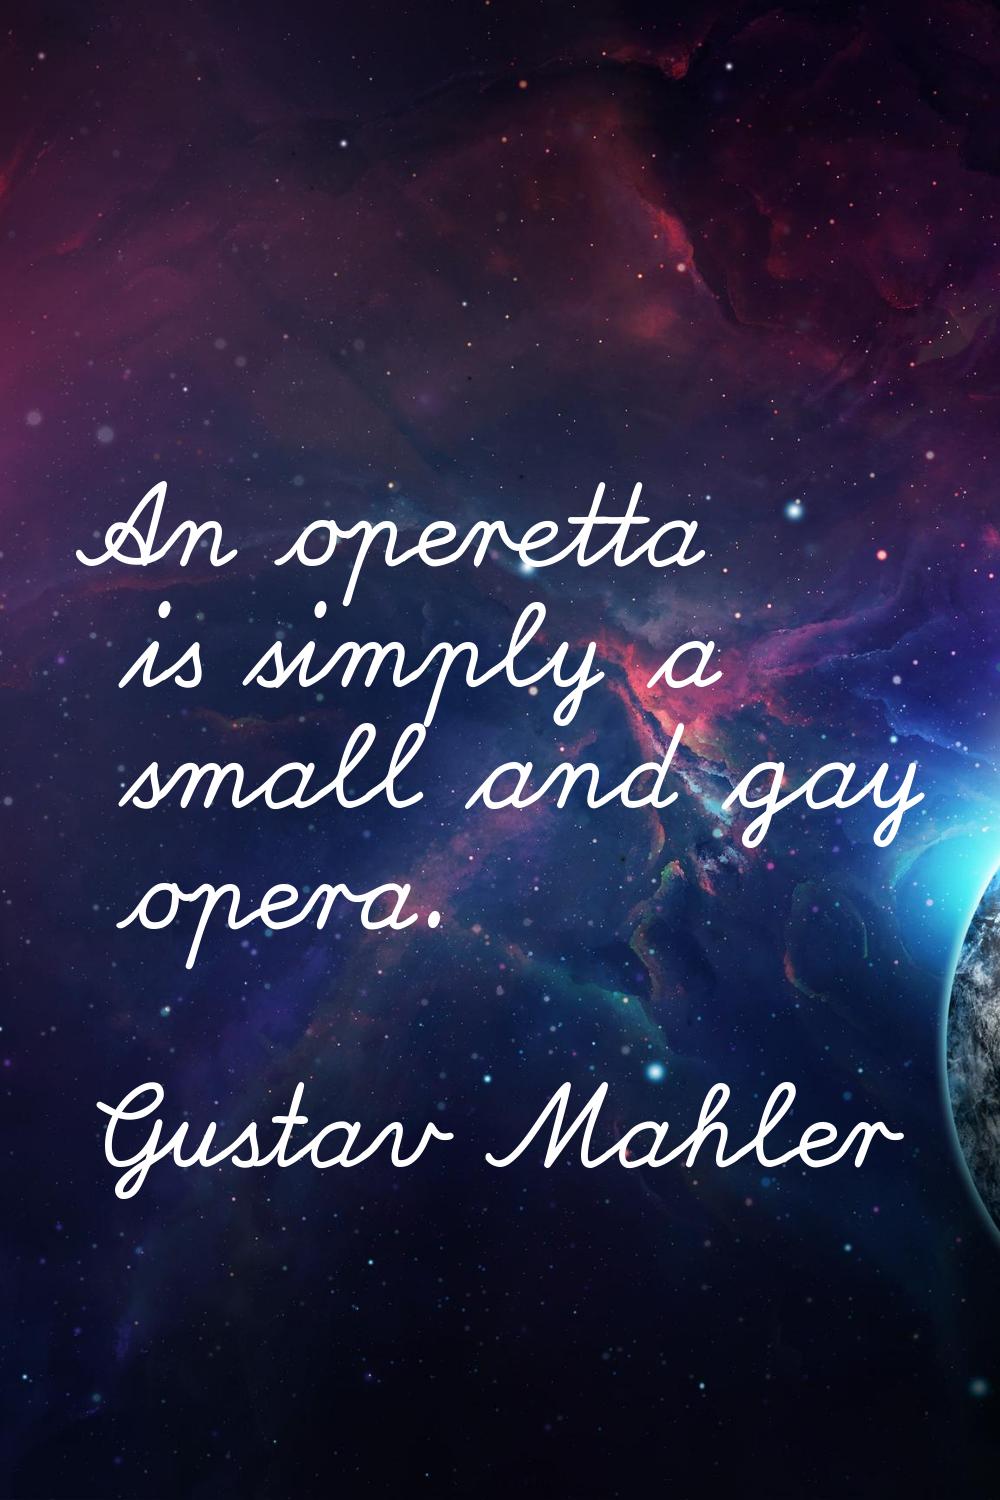 An operetta is simply a small and gay opera.